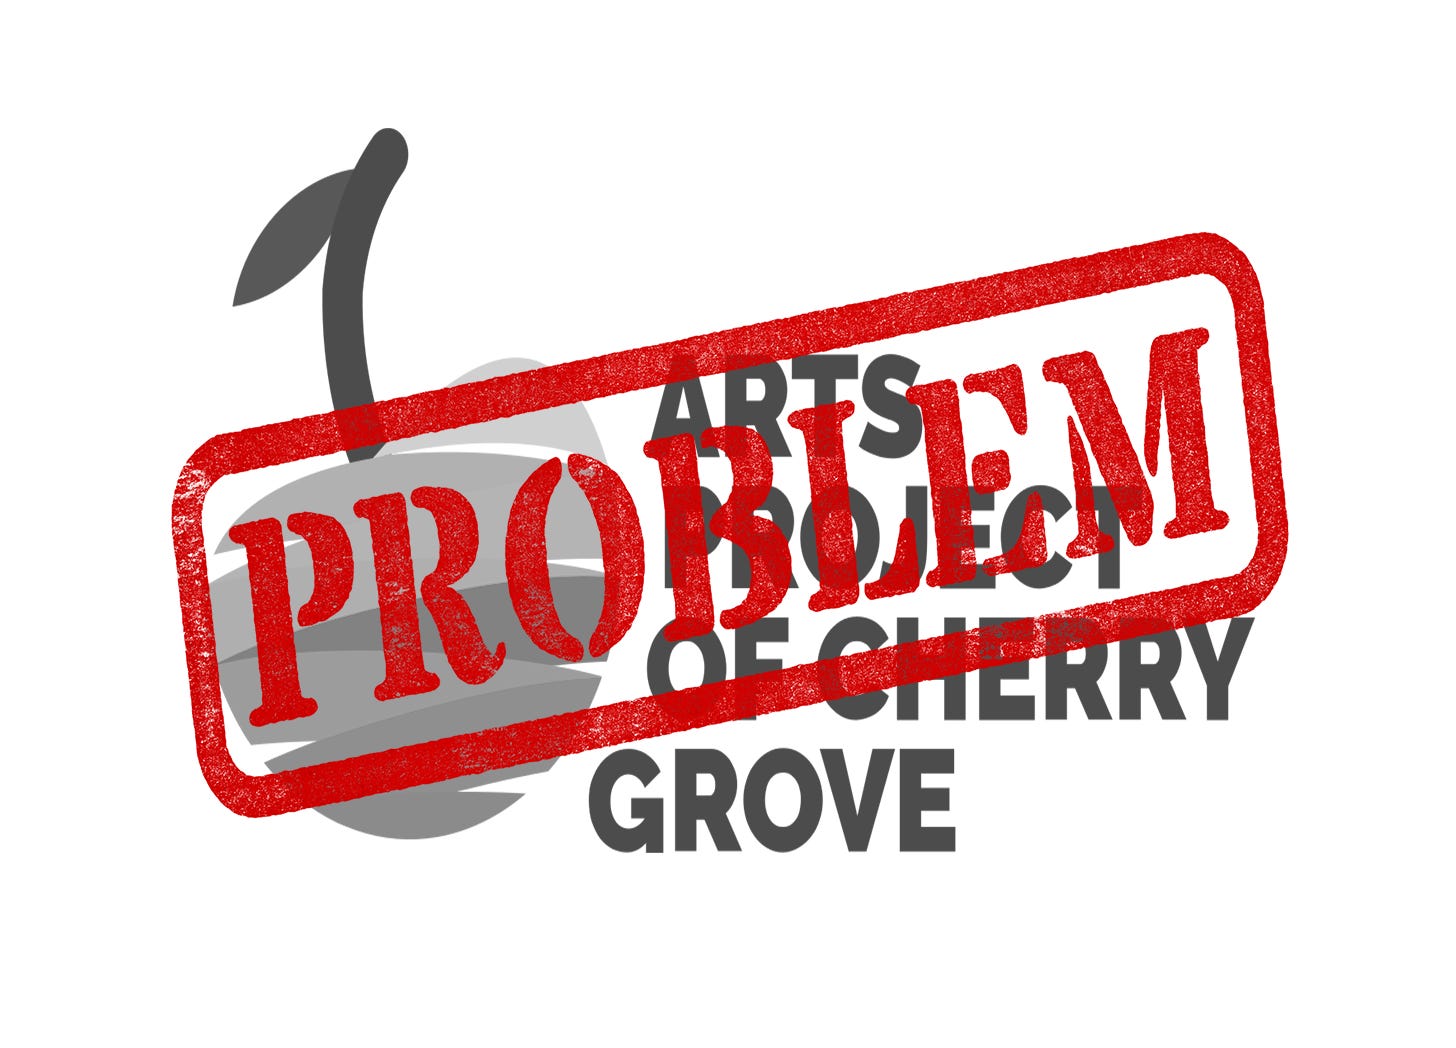 This is a black and white photo of the logo for The Arts Project of Cherry Grove. The logo is a striped cherry on the left, with the name of the organization on the right. The logo has a red stamp that says "Problem" on top of it.